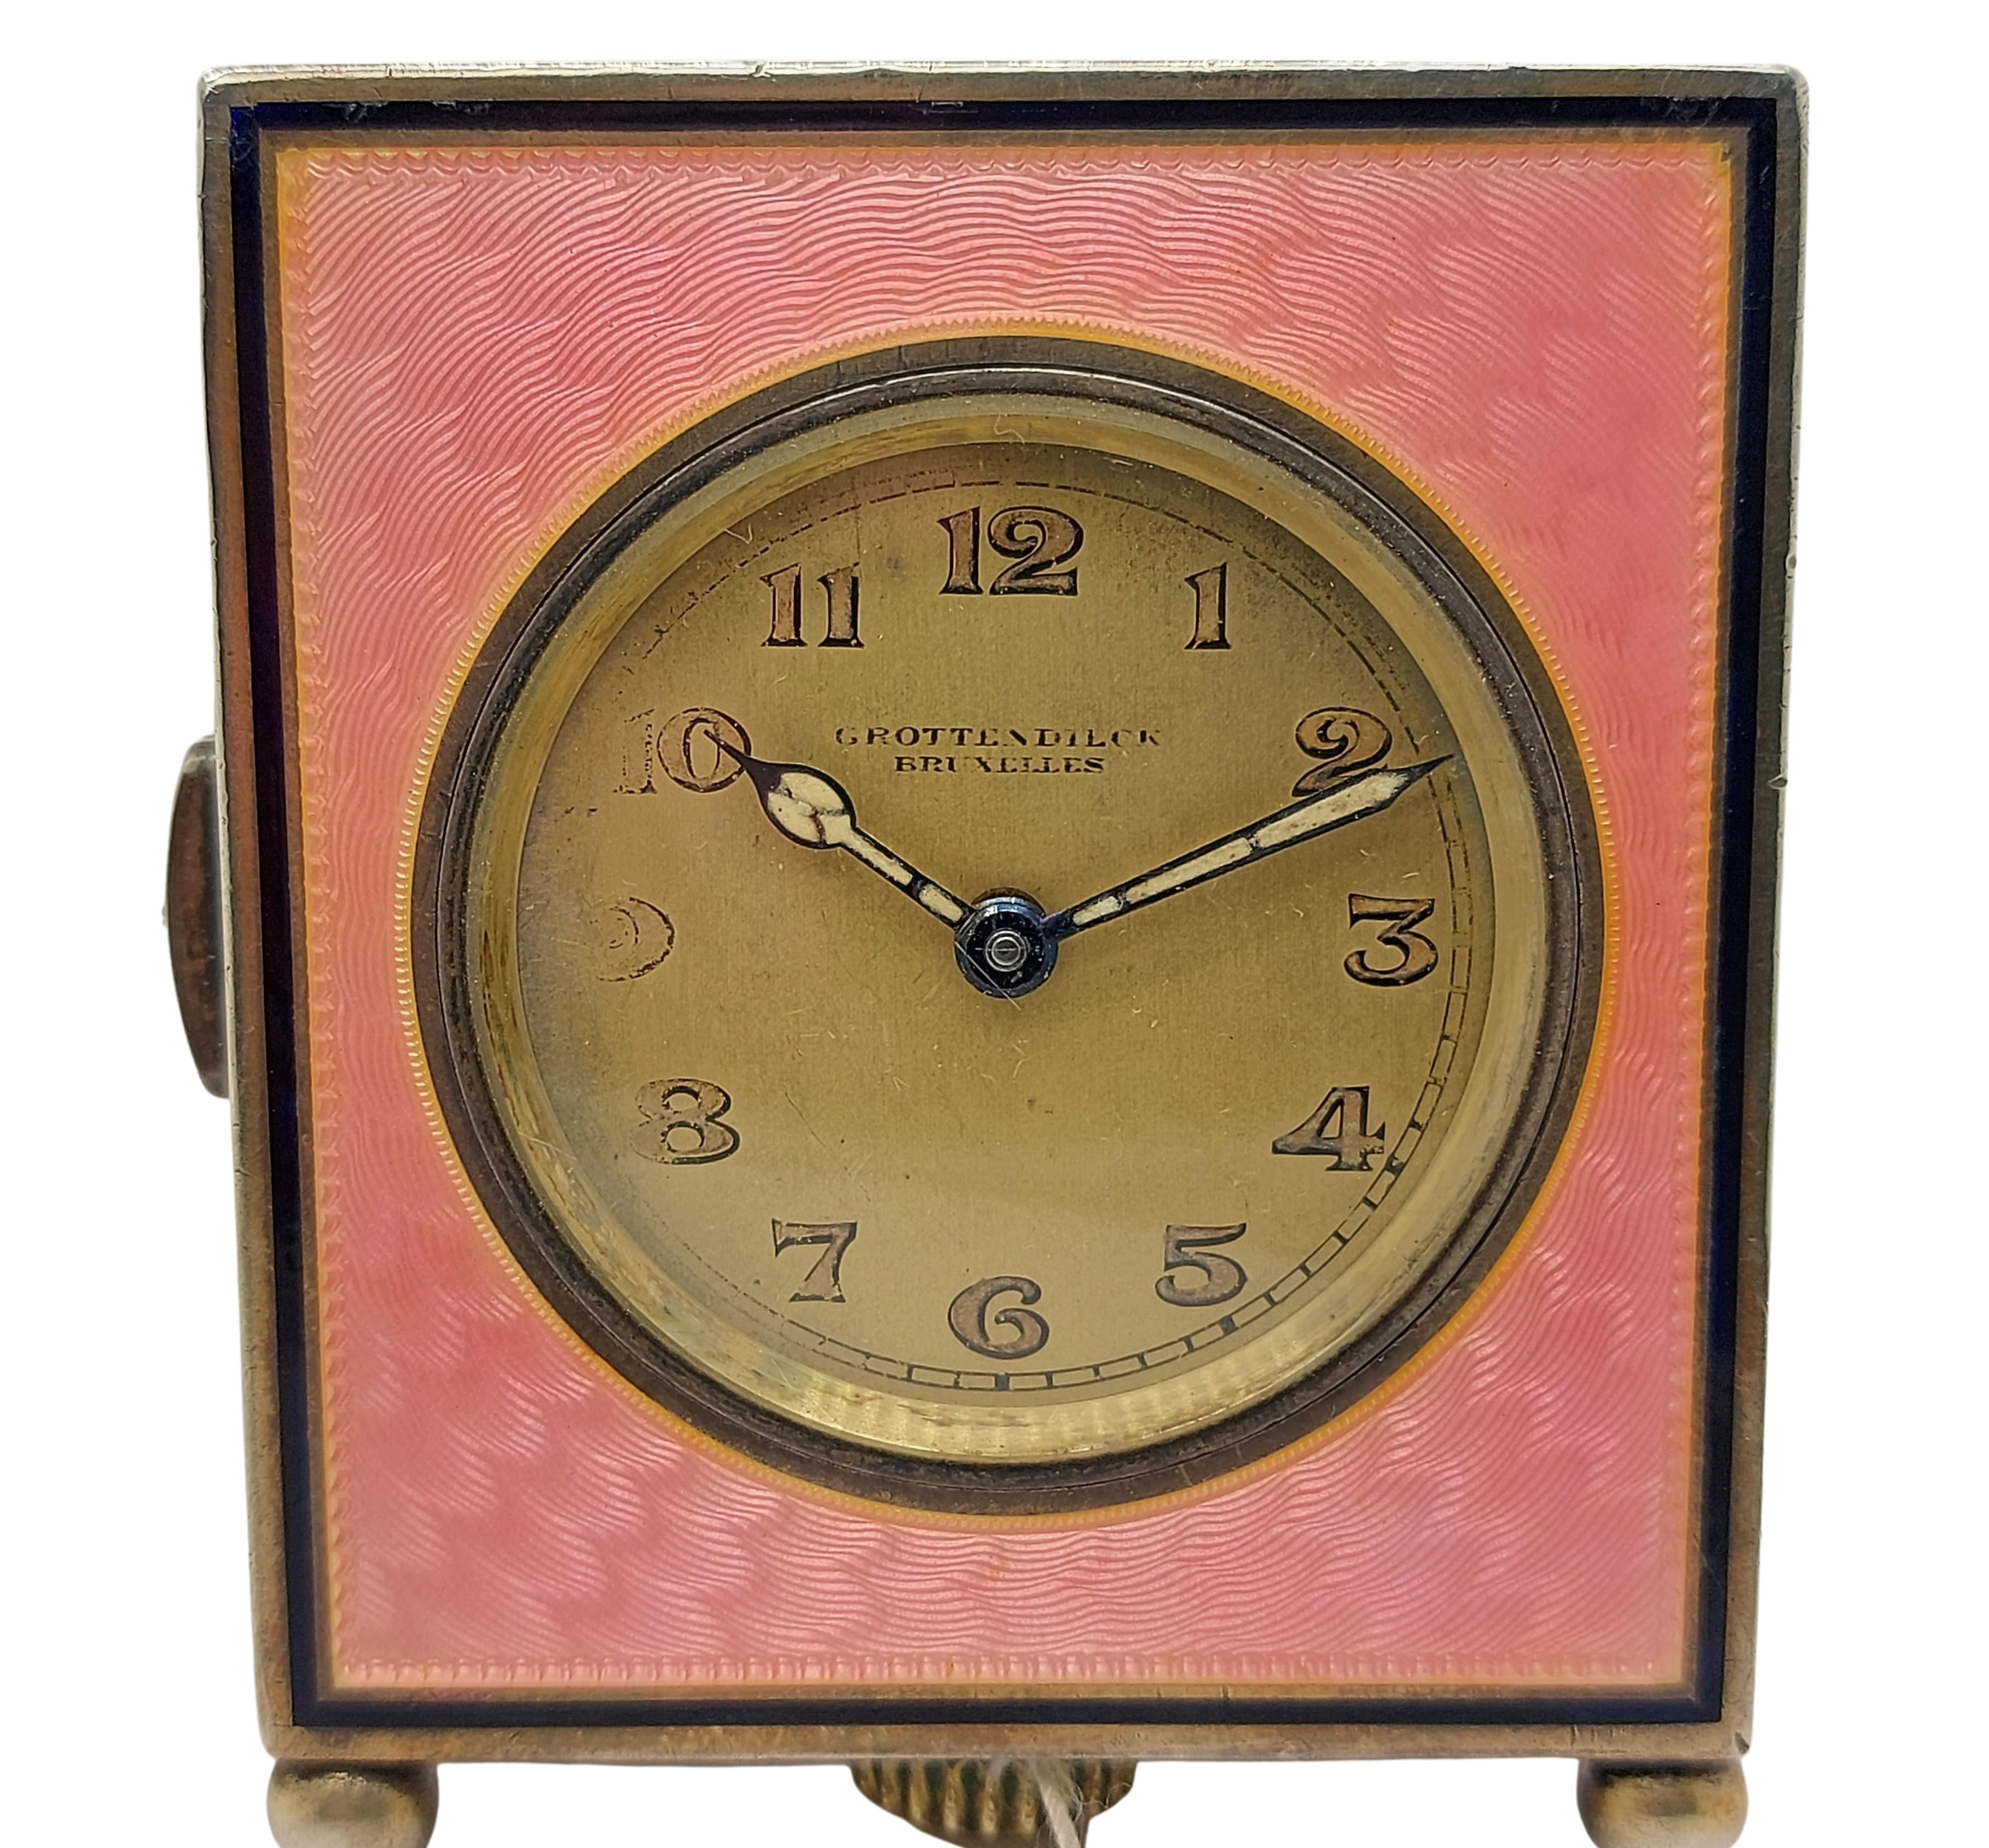 Belle Epoque Grottendieck Bruxelles Enamelled Silver Carriage / Pendulette Clock in Very Nice Working Condition With Quarter Repetition 

Movement: mechanical with manual winding

Functions: hours, minutes, quarter repeater

Case: Solid Silver 0.935